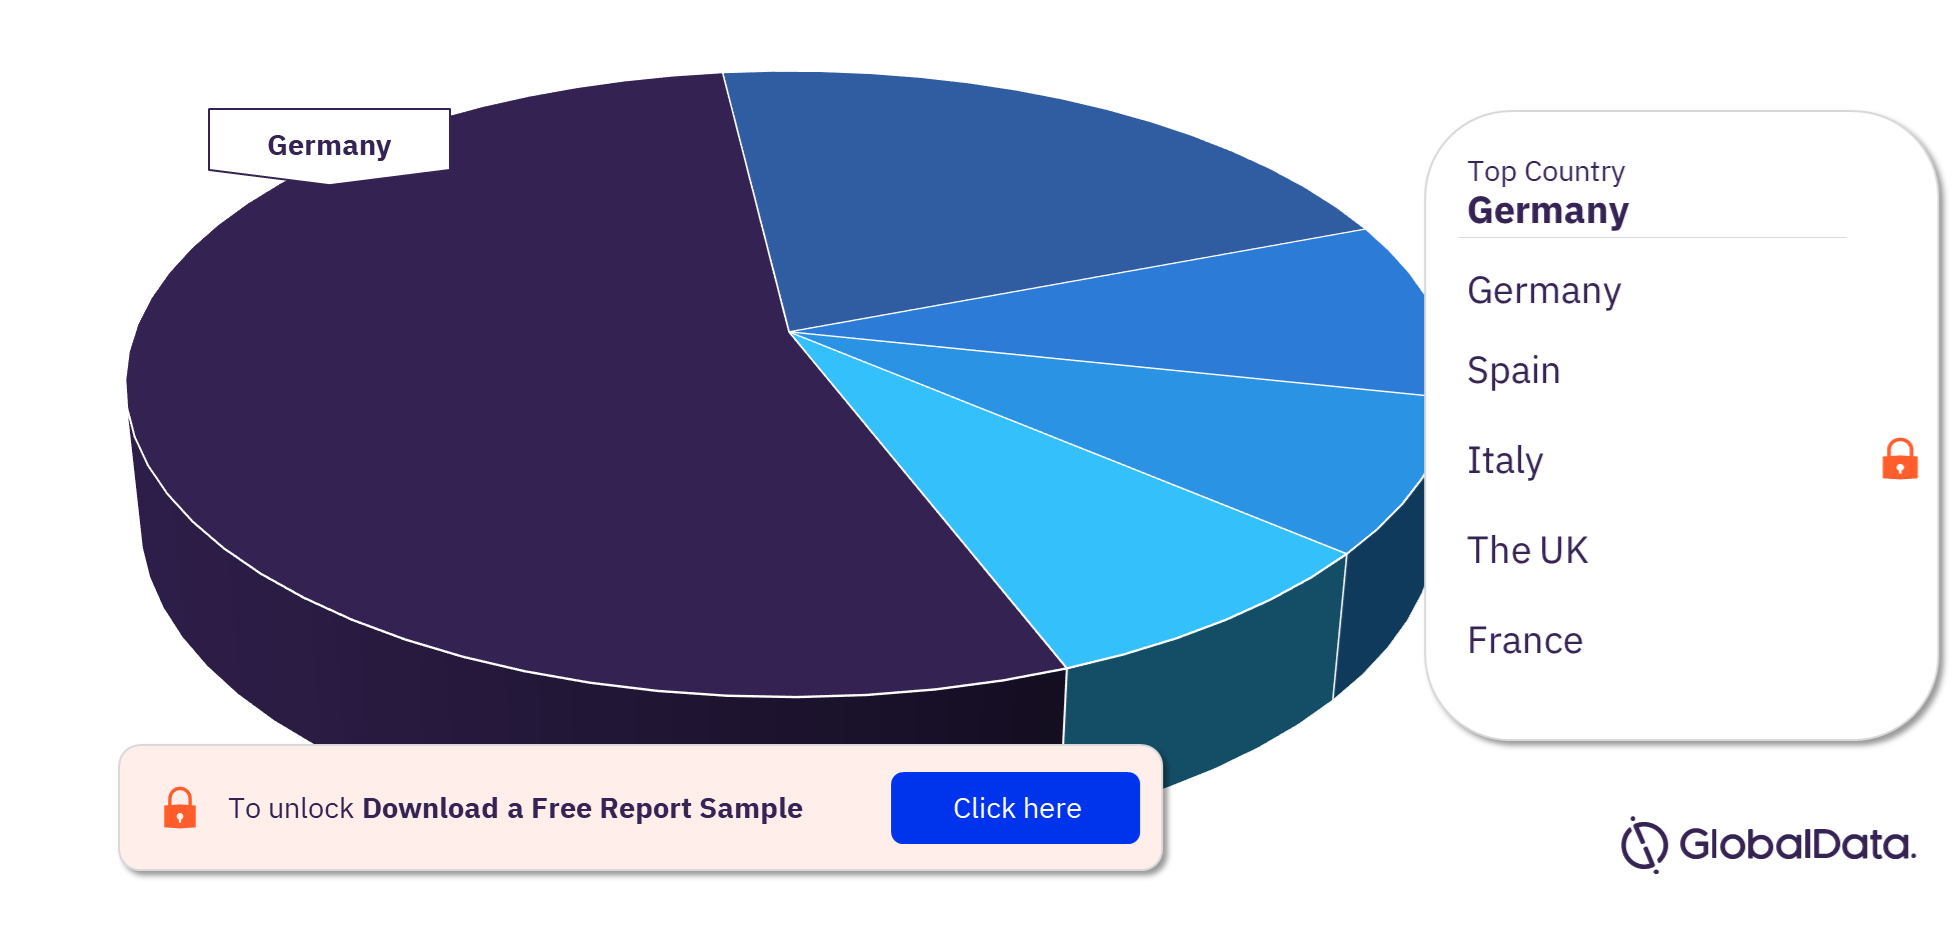 EU5 ERCP and PTC Procedures Market Analysis by Countries, 2022 (%)